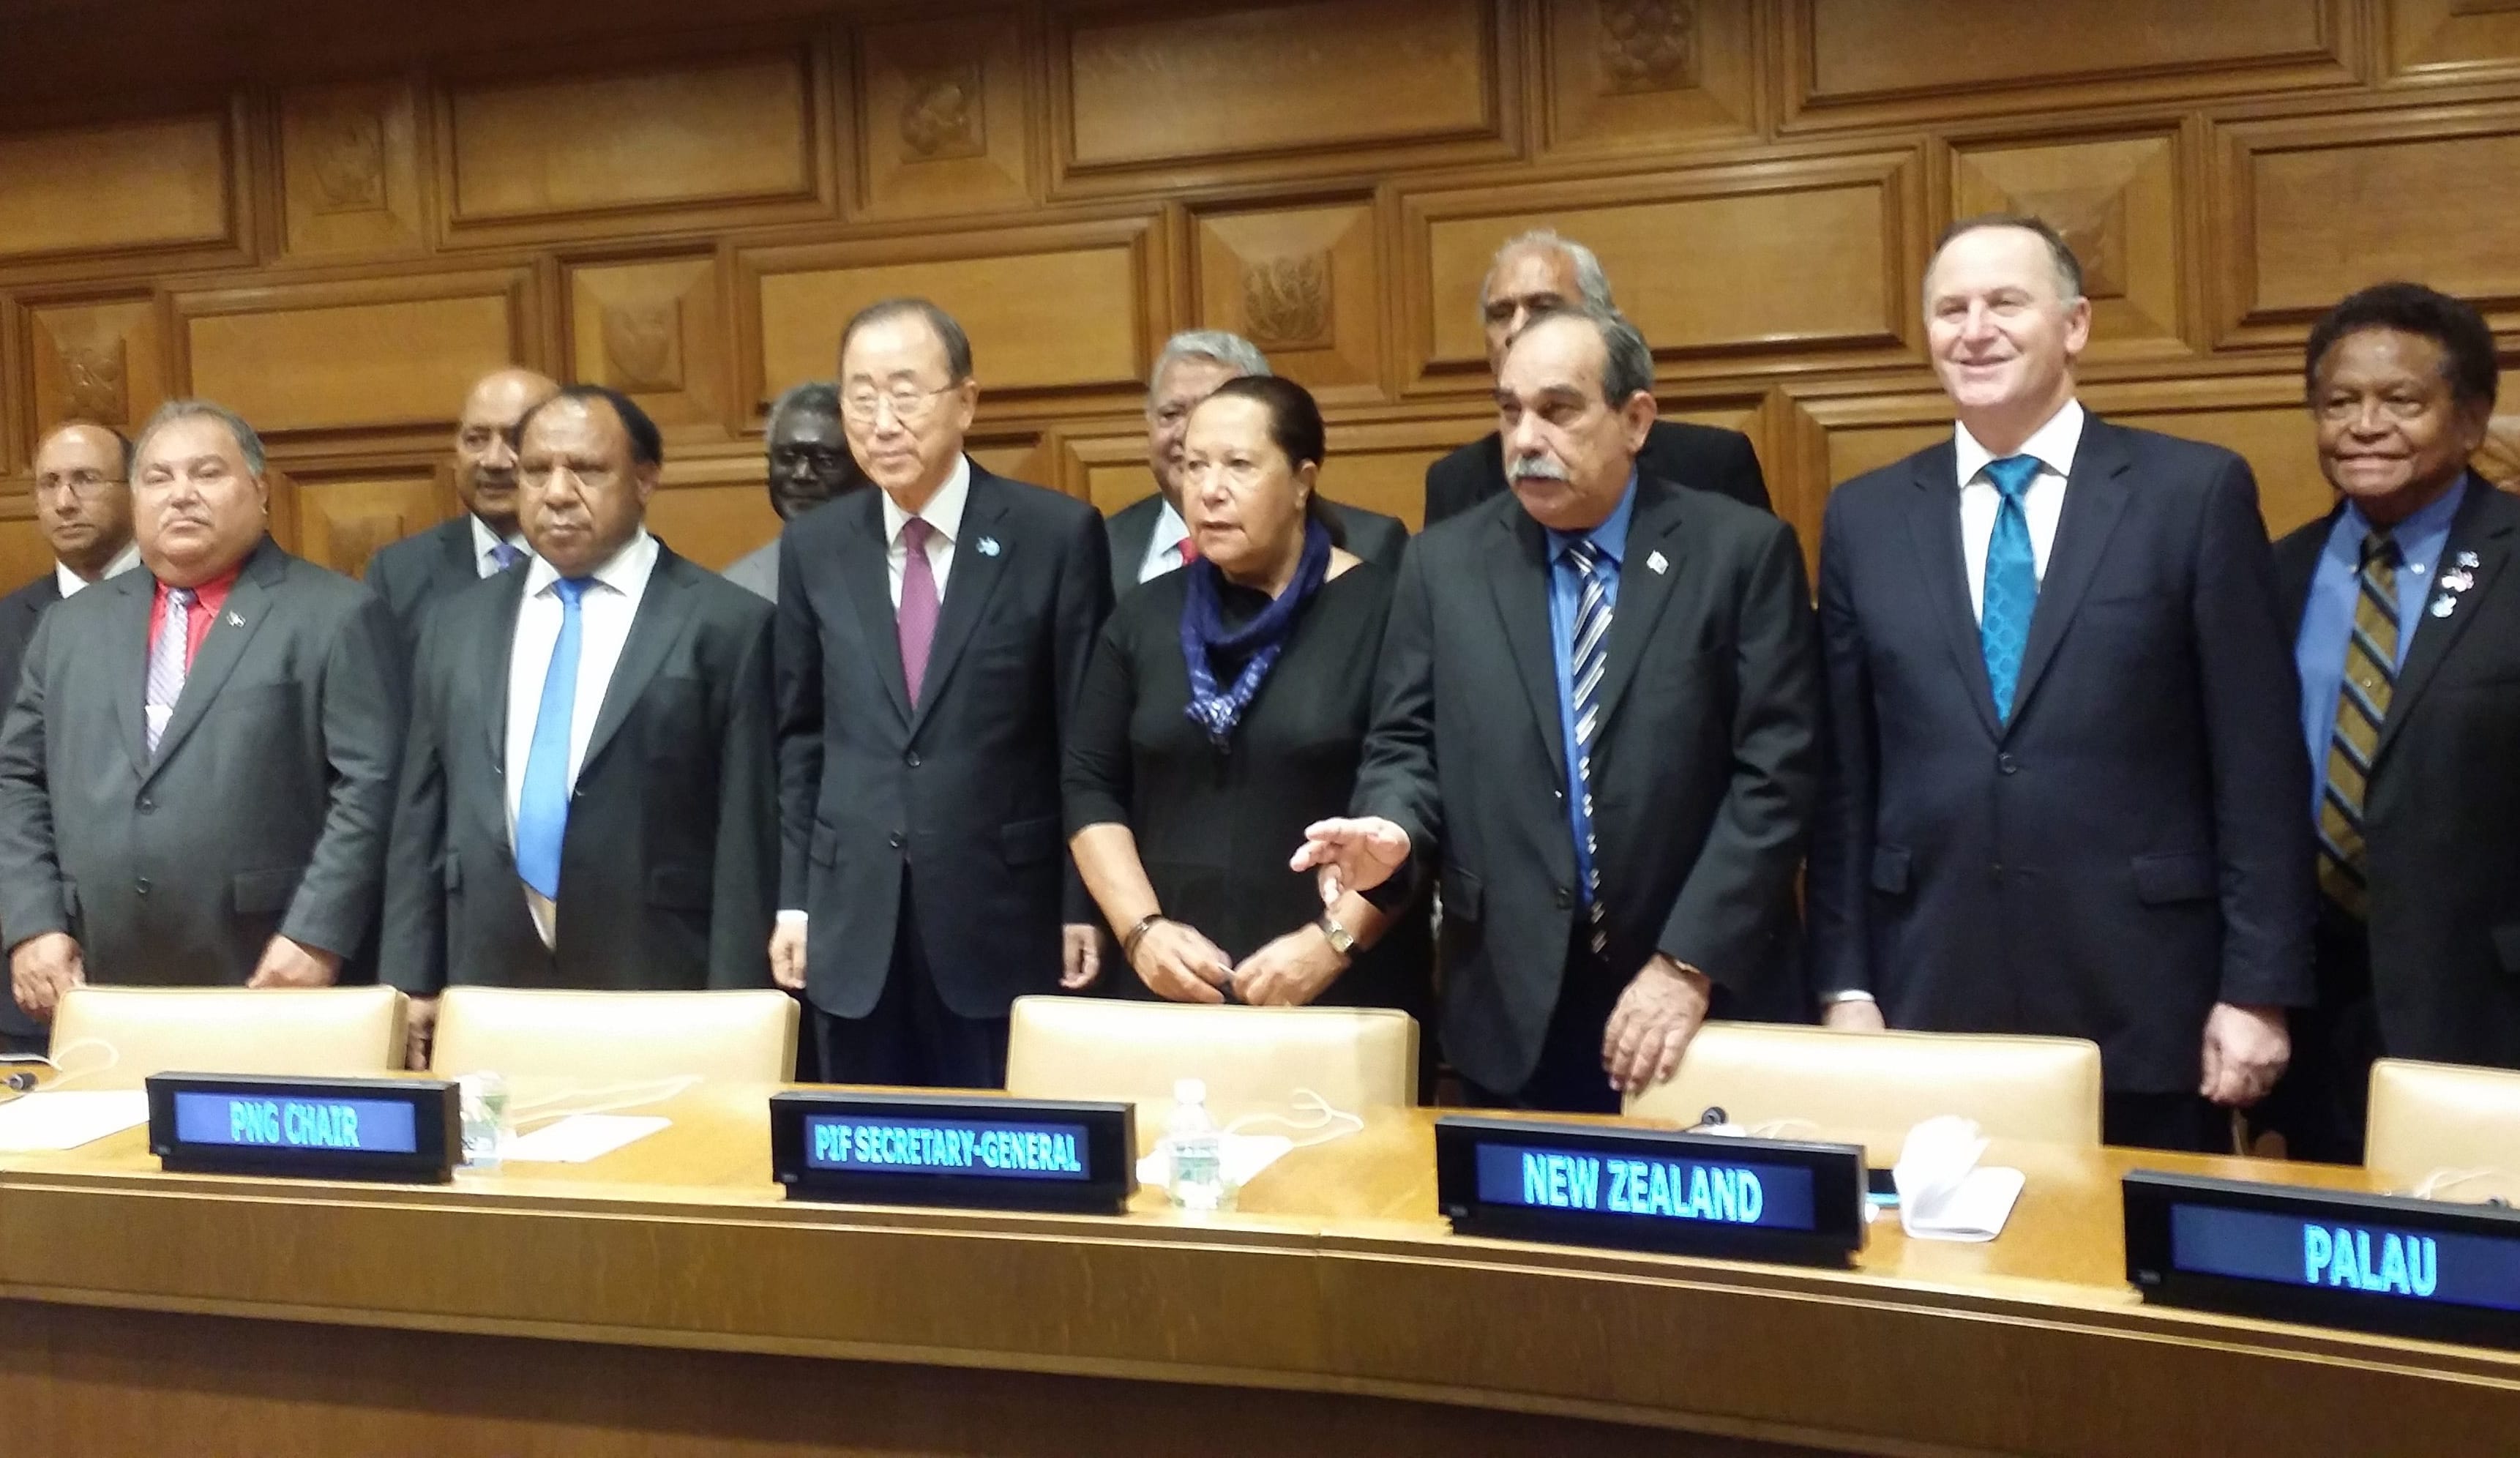 Pacific Islands Forum leaders at the UN.Front row from left: Nauru president Baron Waqa, PNG foreign minister Rimbink Pato, UN secretary-general Ban Ki-moon, Pacific Forum sec-gen Dame Meg Taylor, Federated States of Micronesia president Peter Christian, New Zealand prime minister John Key.